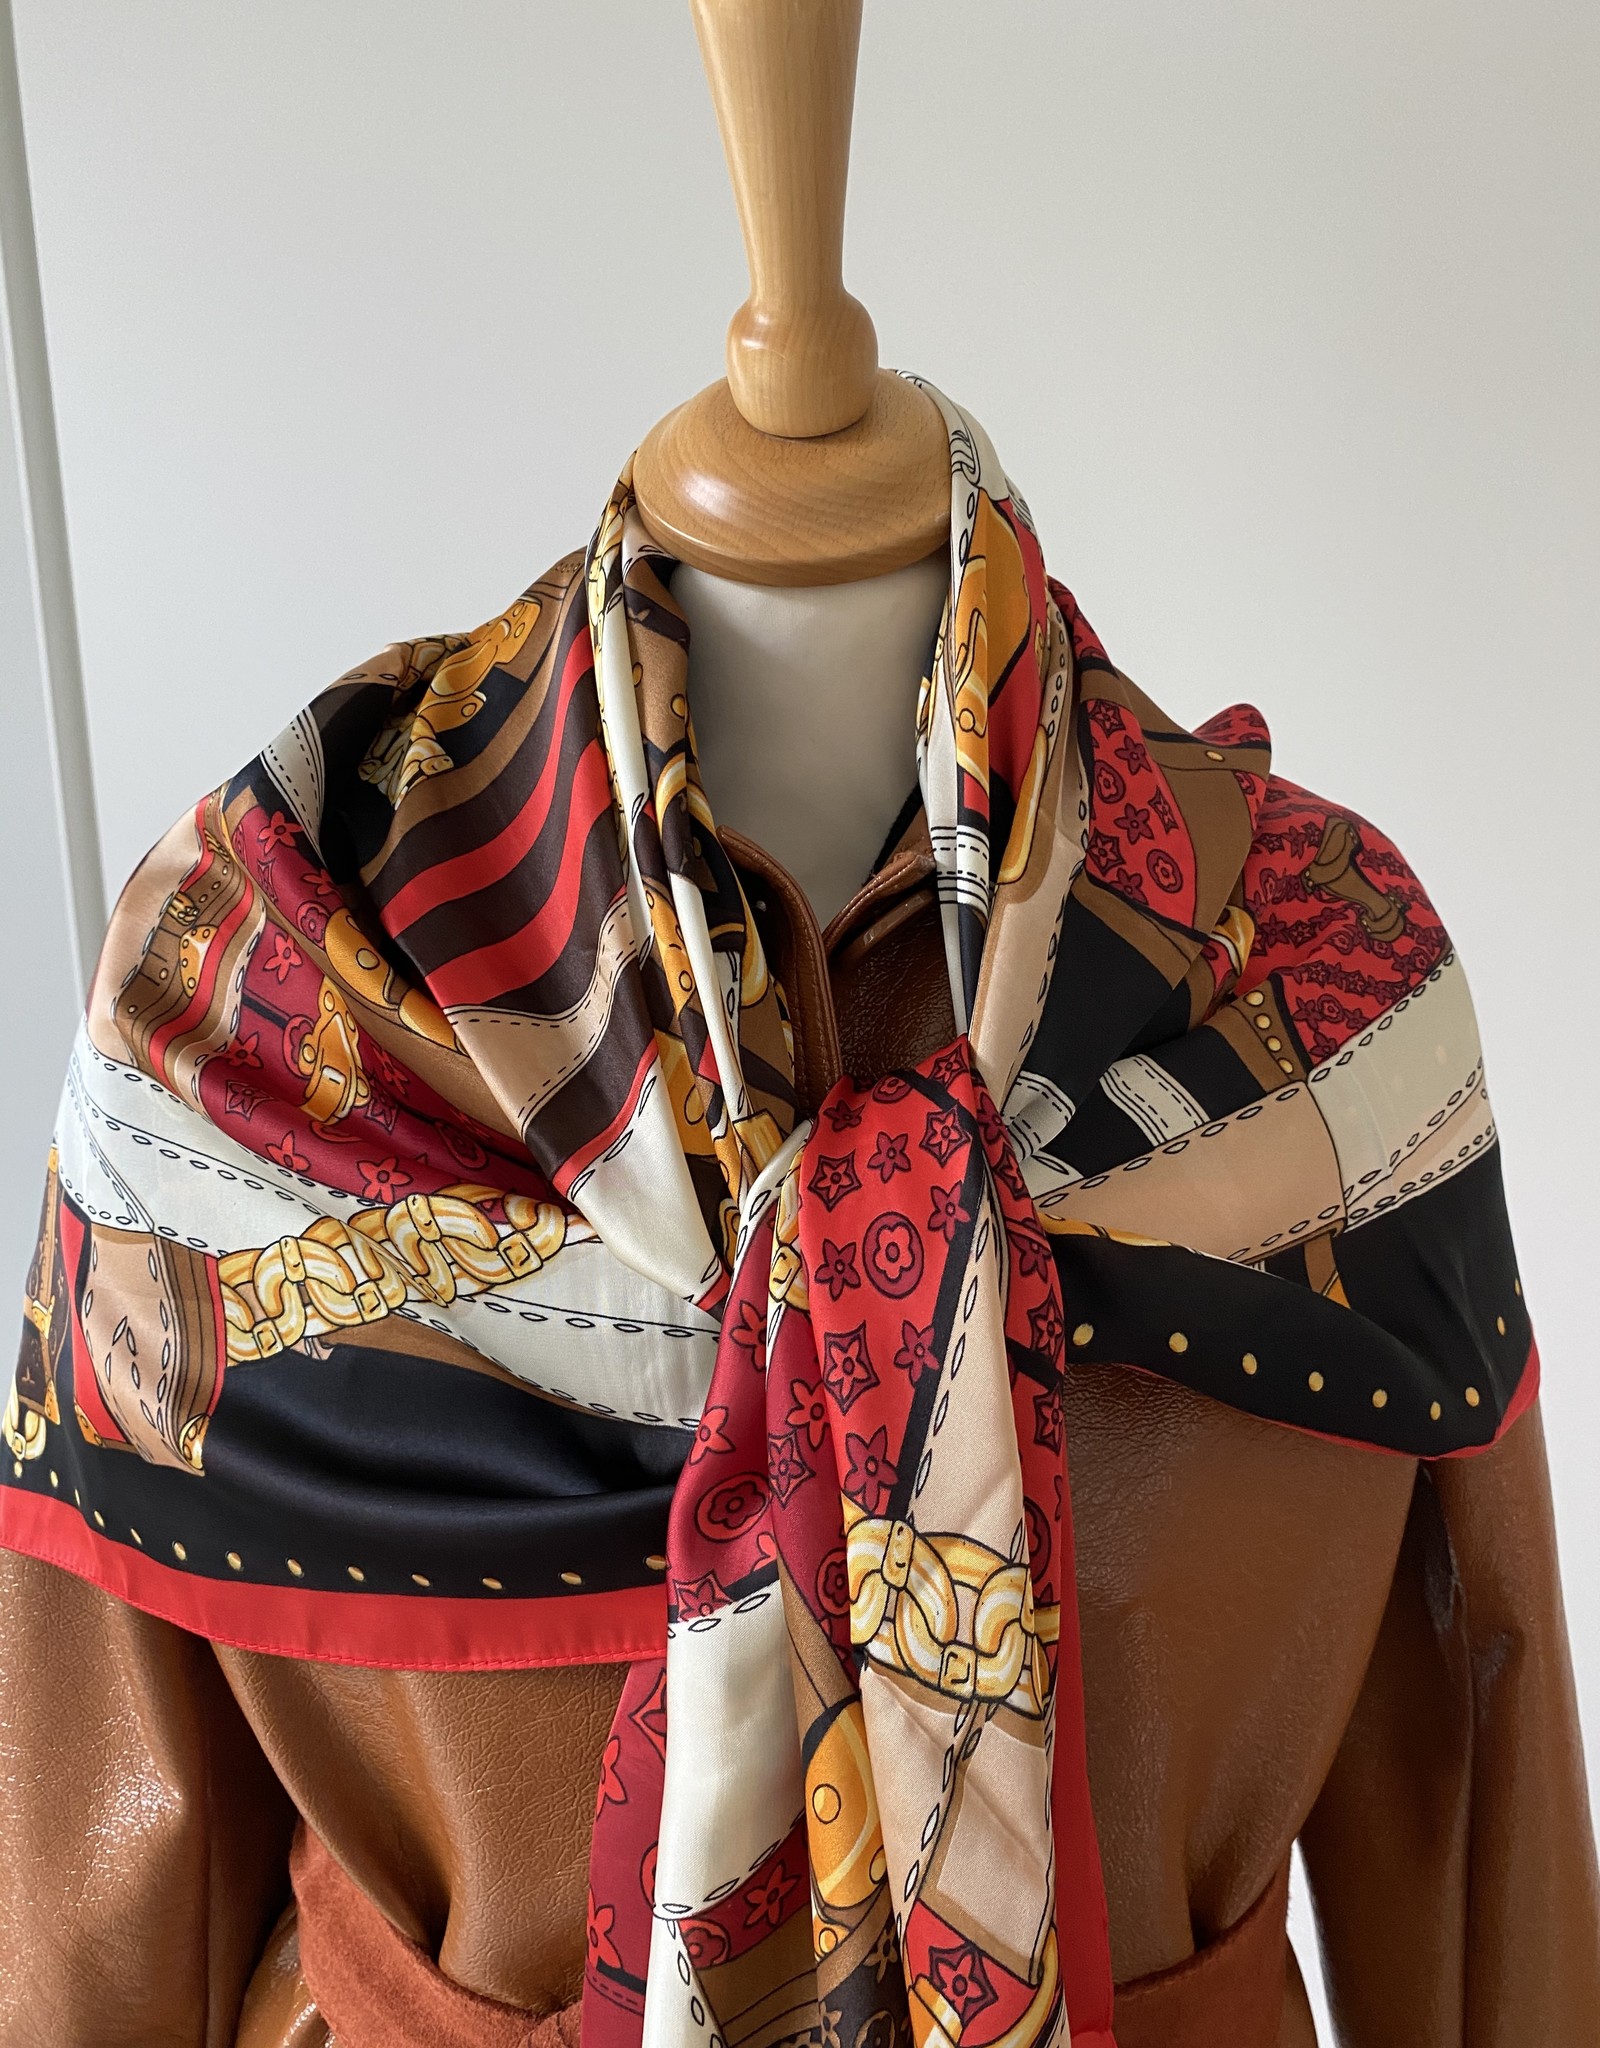 Scarf multicolor with red, camel, orange and black.